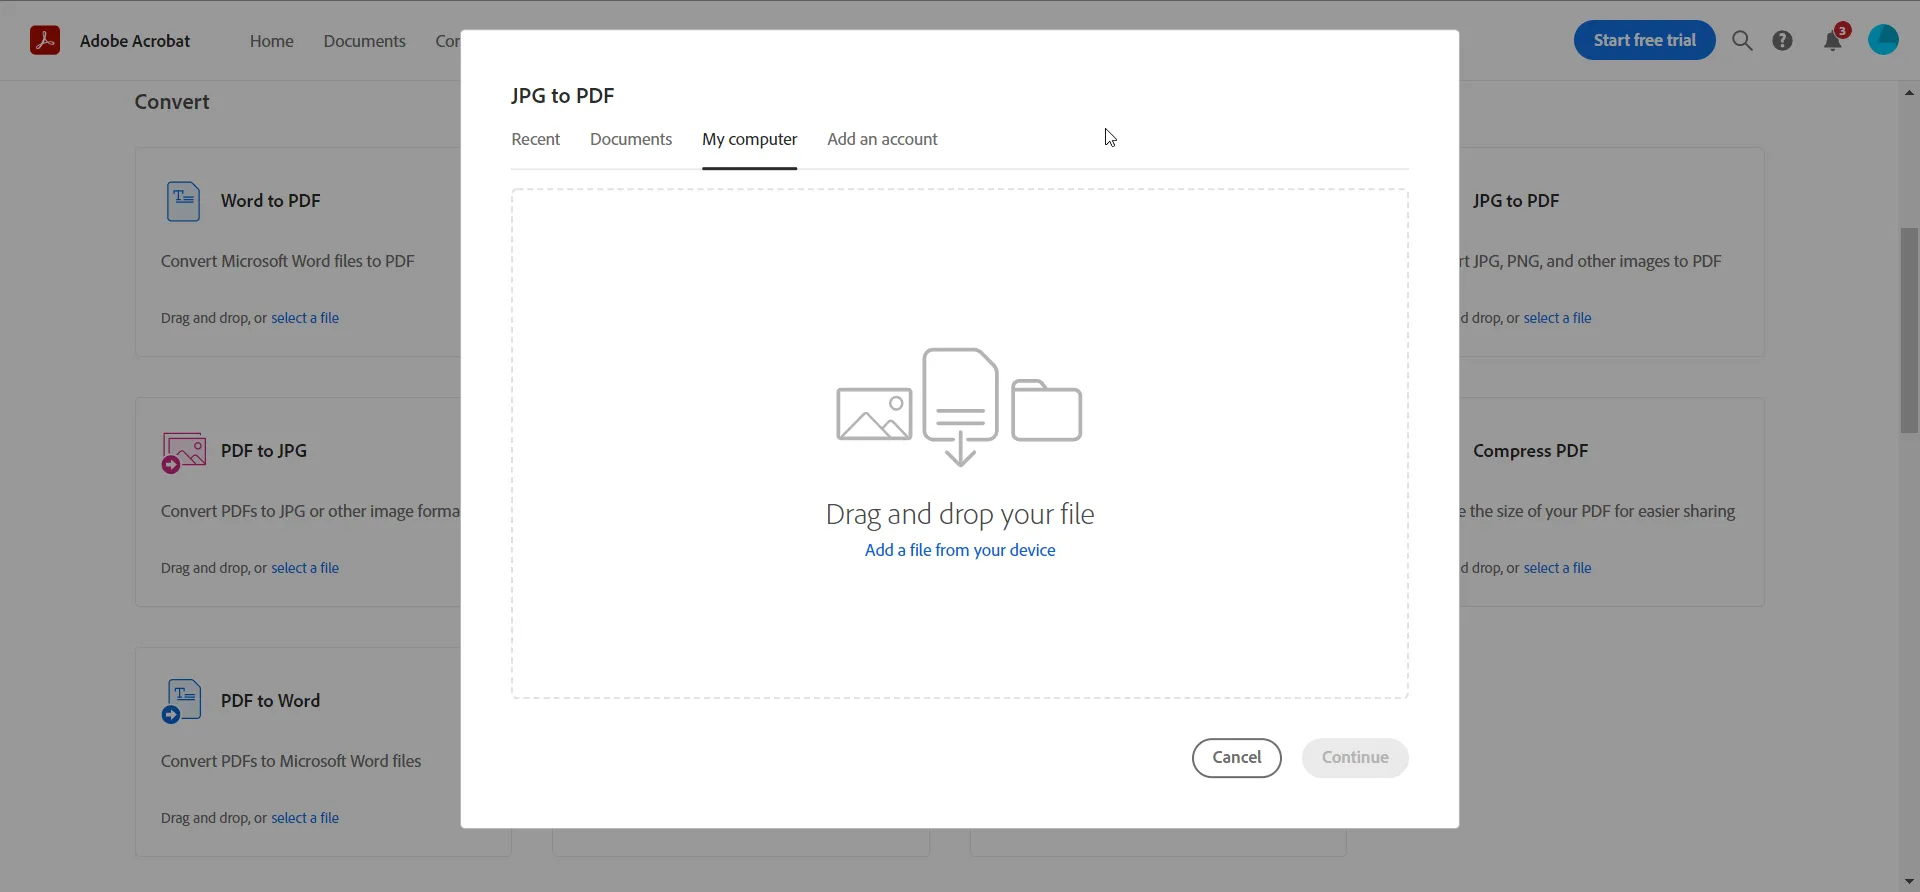 How to Combine Images Into One PDF, Figure 4: Drag-and-drop file modal for JPG to PDF